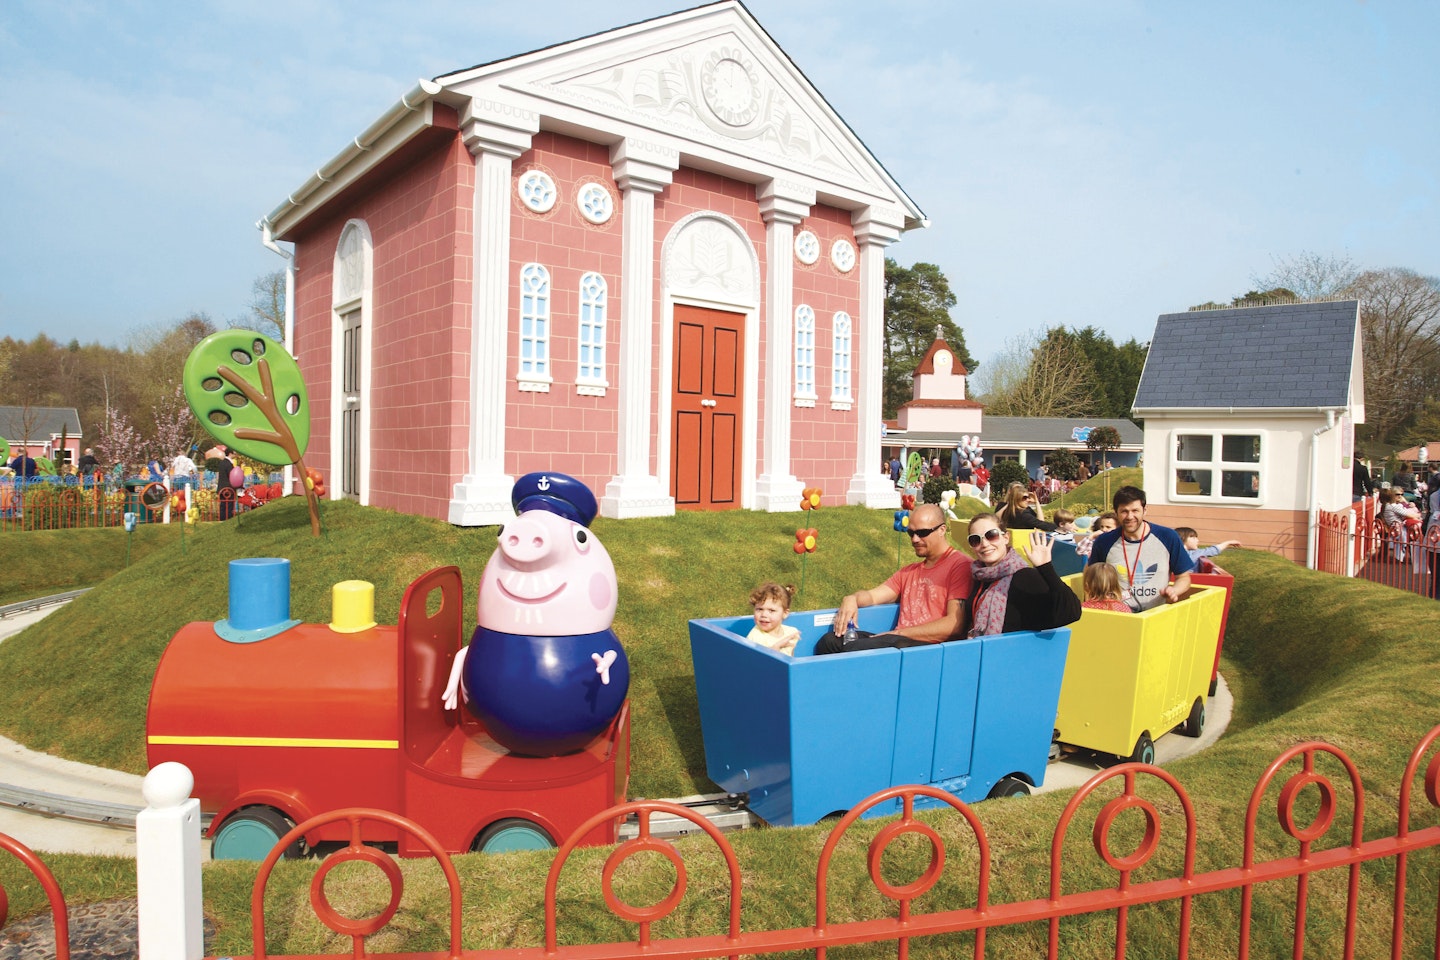 Peppa Pig World: Your go-to guide